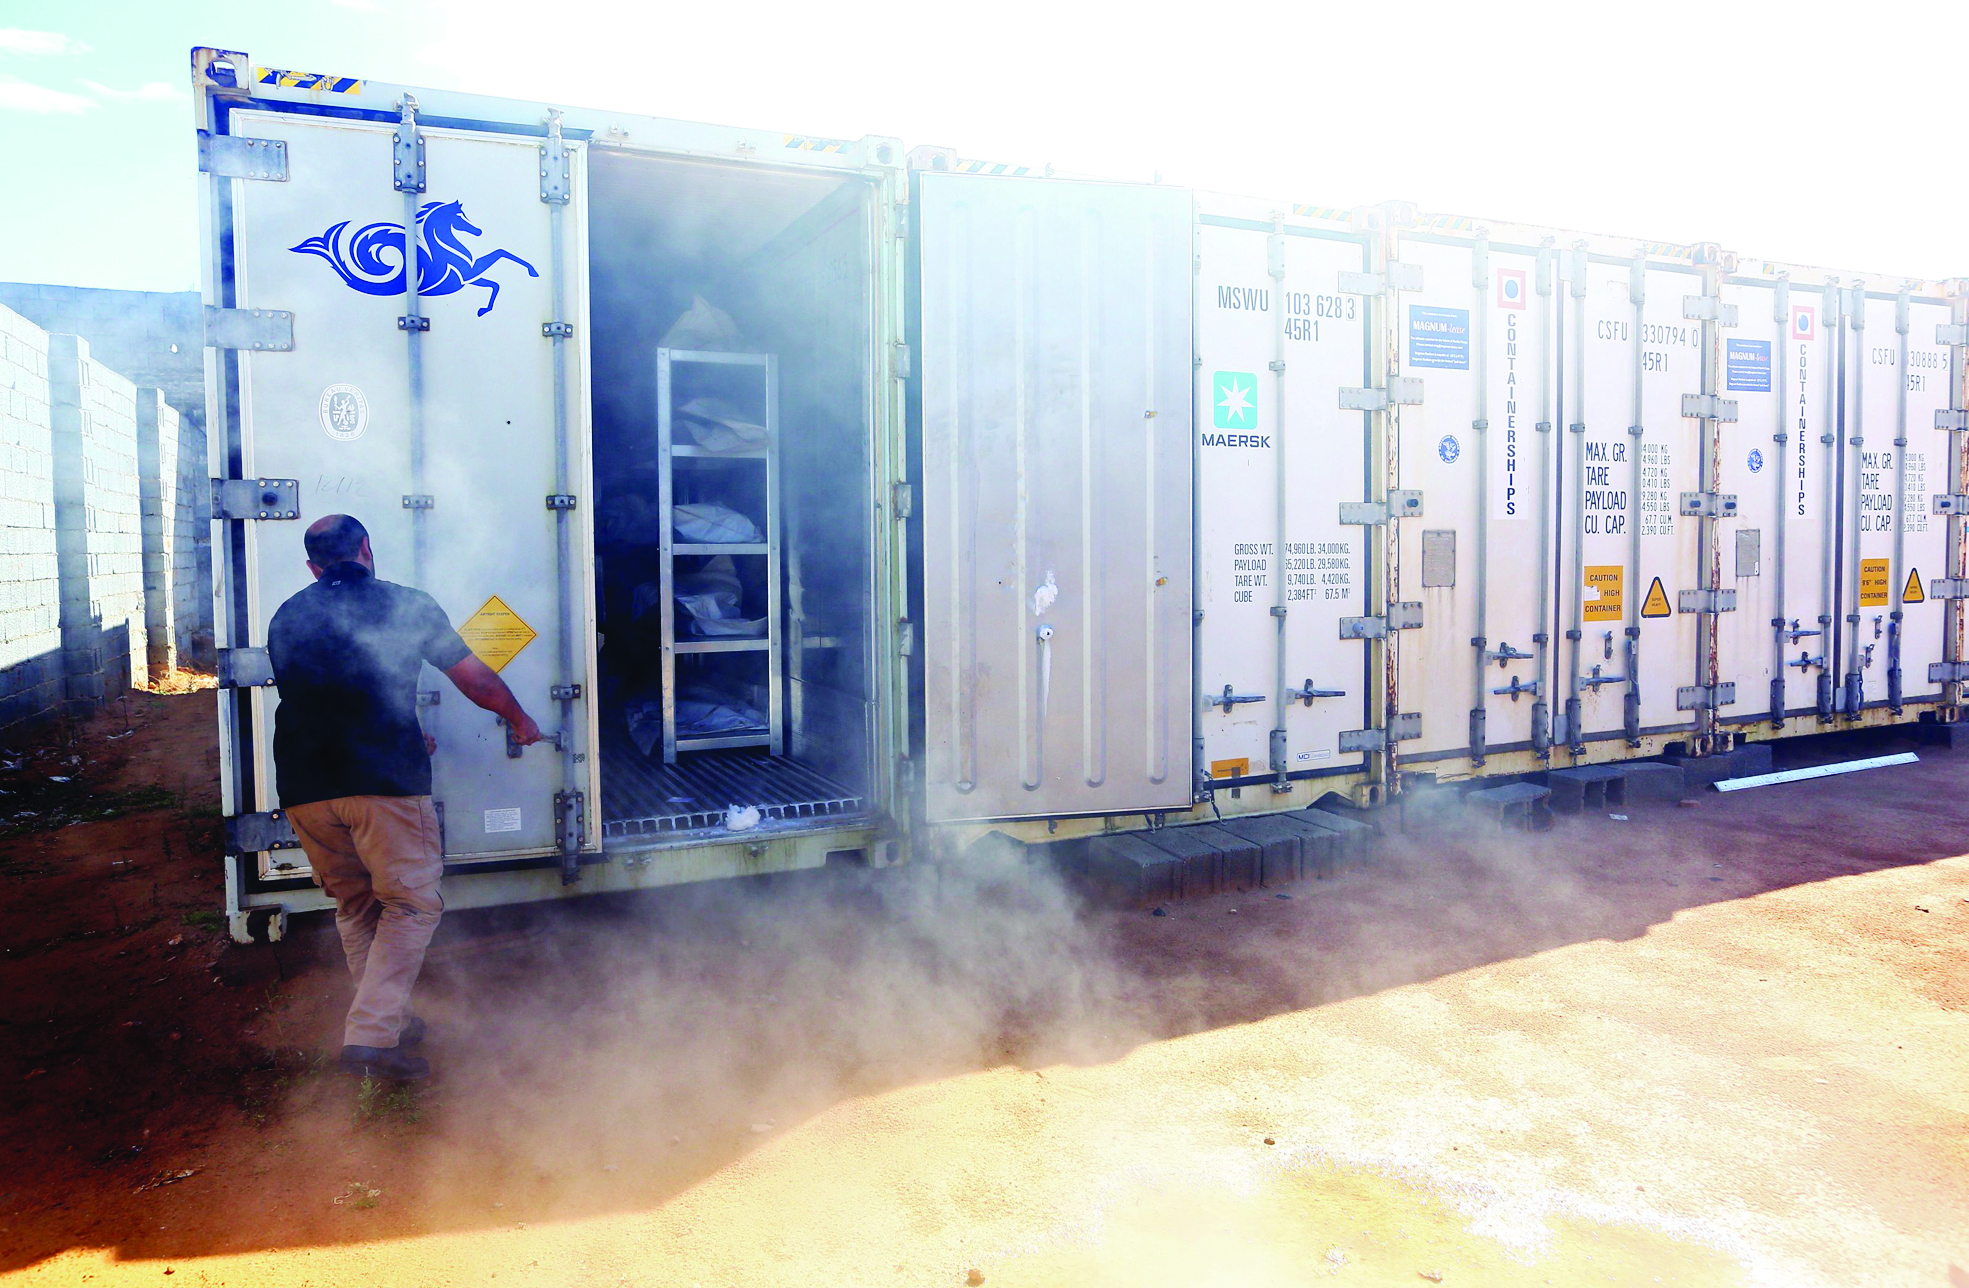 MISRATA: Ali Tuwaileb who is in charge of a high security anti-organized crime complex in Misrata where the bodies of Islamic State (IS) group fighters are being stored opens one of the refrigerated containers at a make-shift morgue. - AFP 